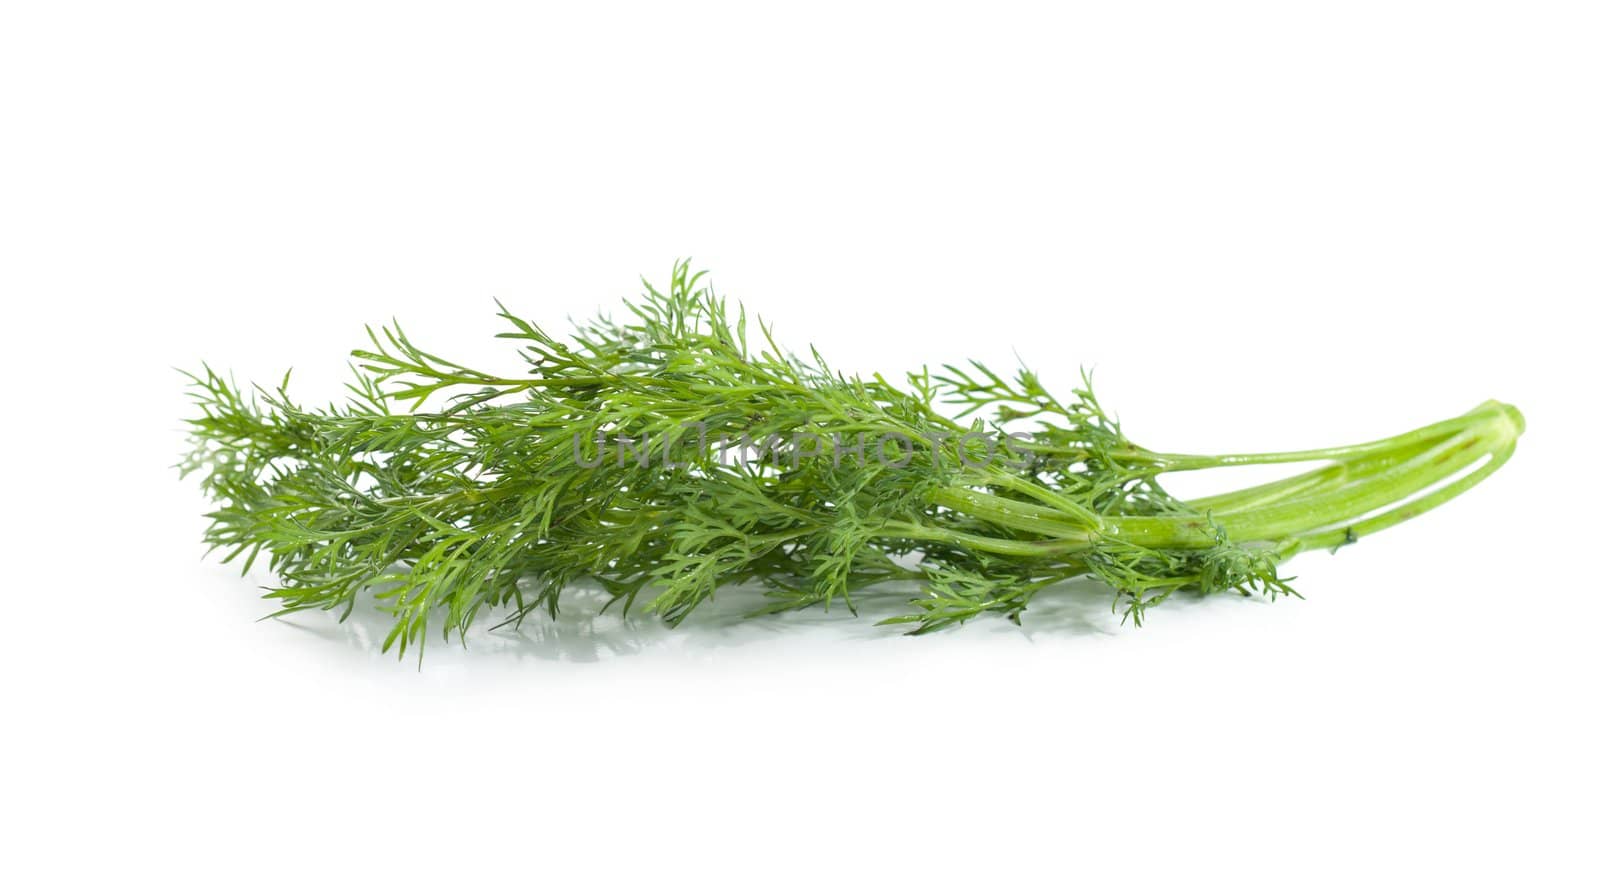 A branch of dill by Givaga